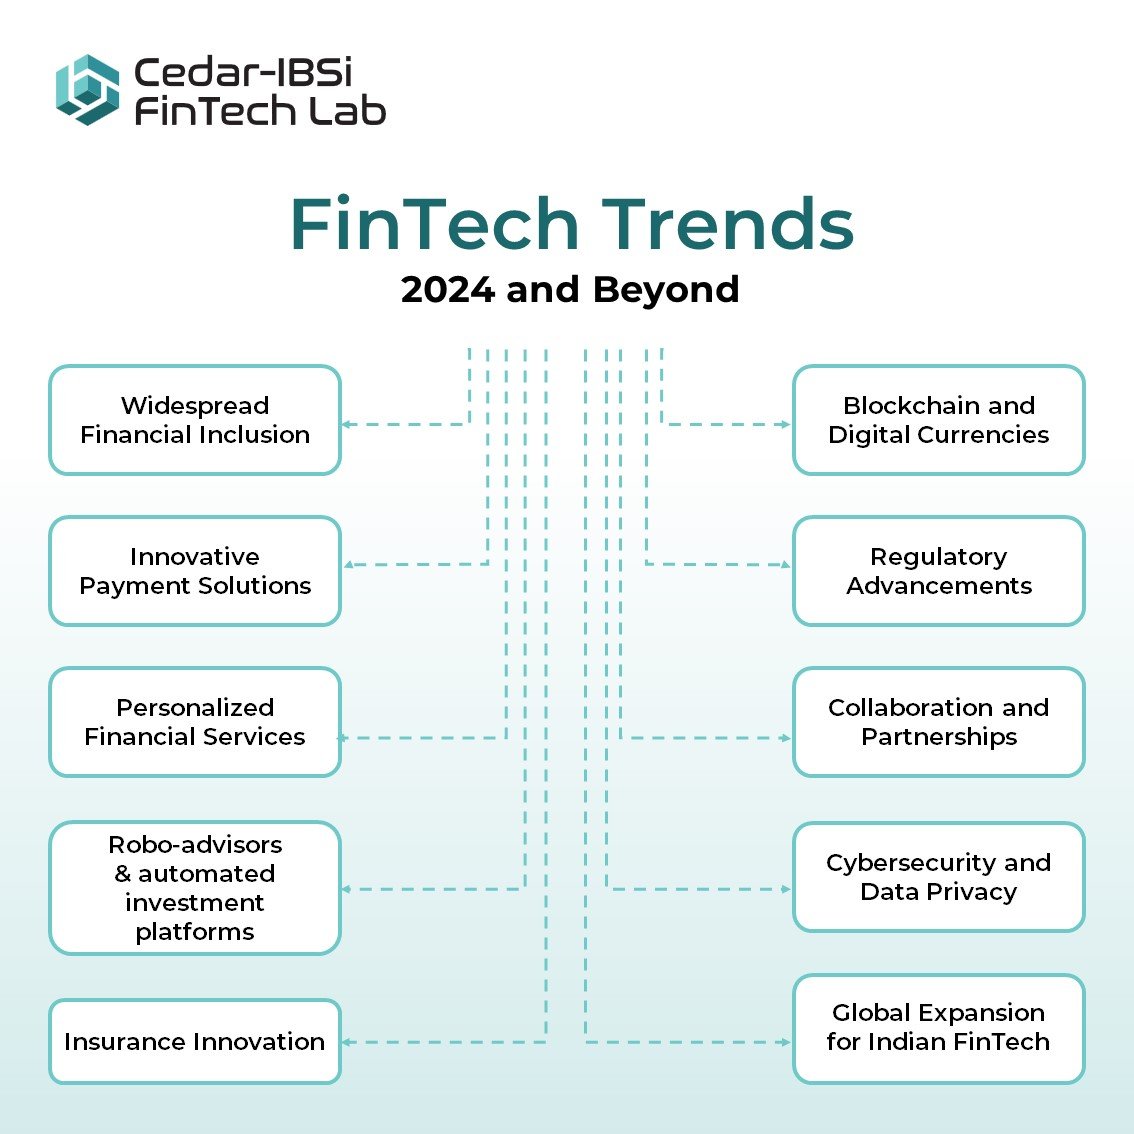 Unleashing FinTech’s Soaring Potential in 2024 and beyond 

✅Widespread #Finserv Inclusion
✅Innovative #Payment Solutions
✅Personalized #Fintech Services
✅#Wealth Management for All
✅#Insurance Innovation
✅#Blockchain and Digital Currencies
✅#RegTech Advancements…